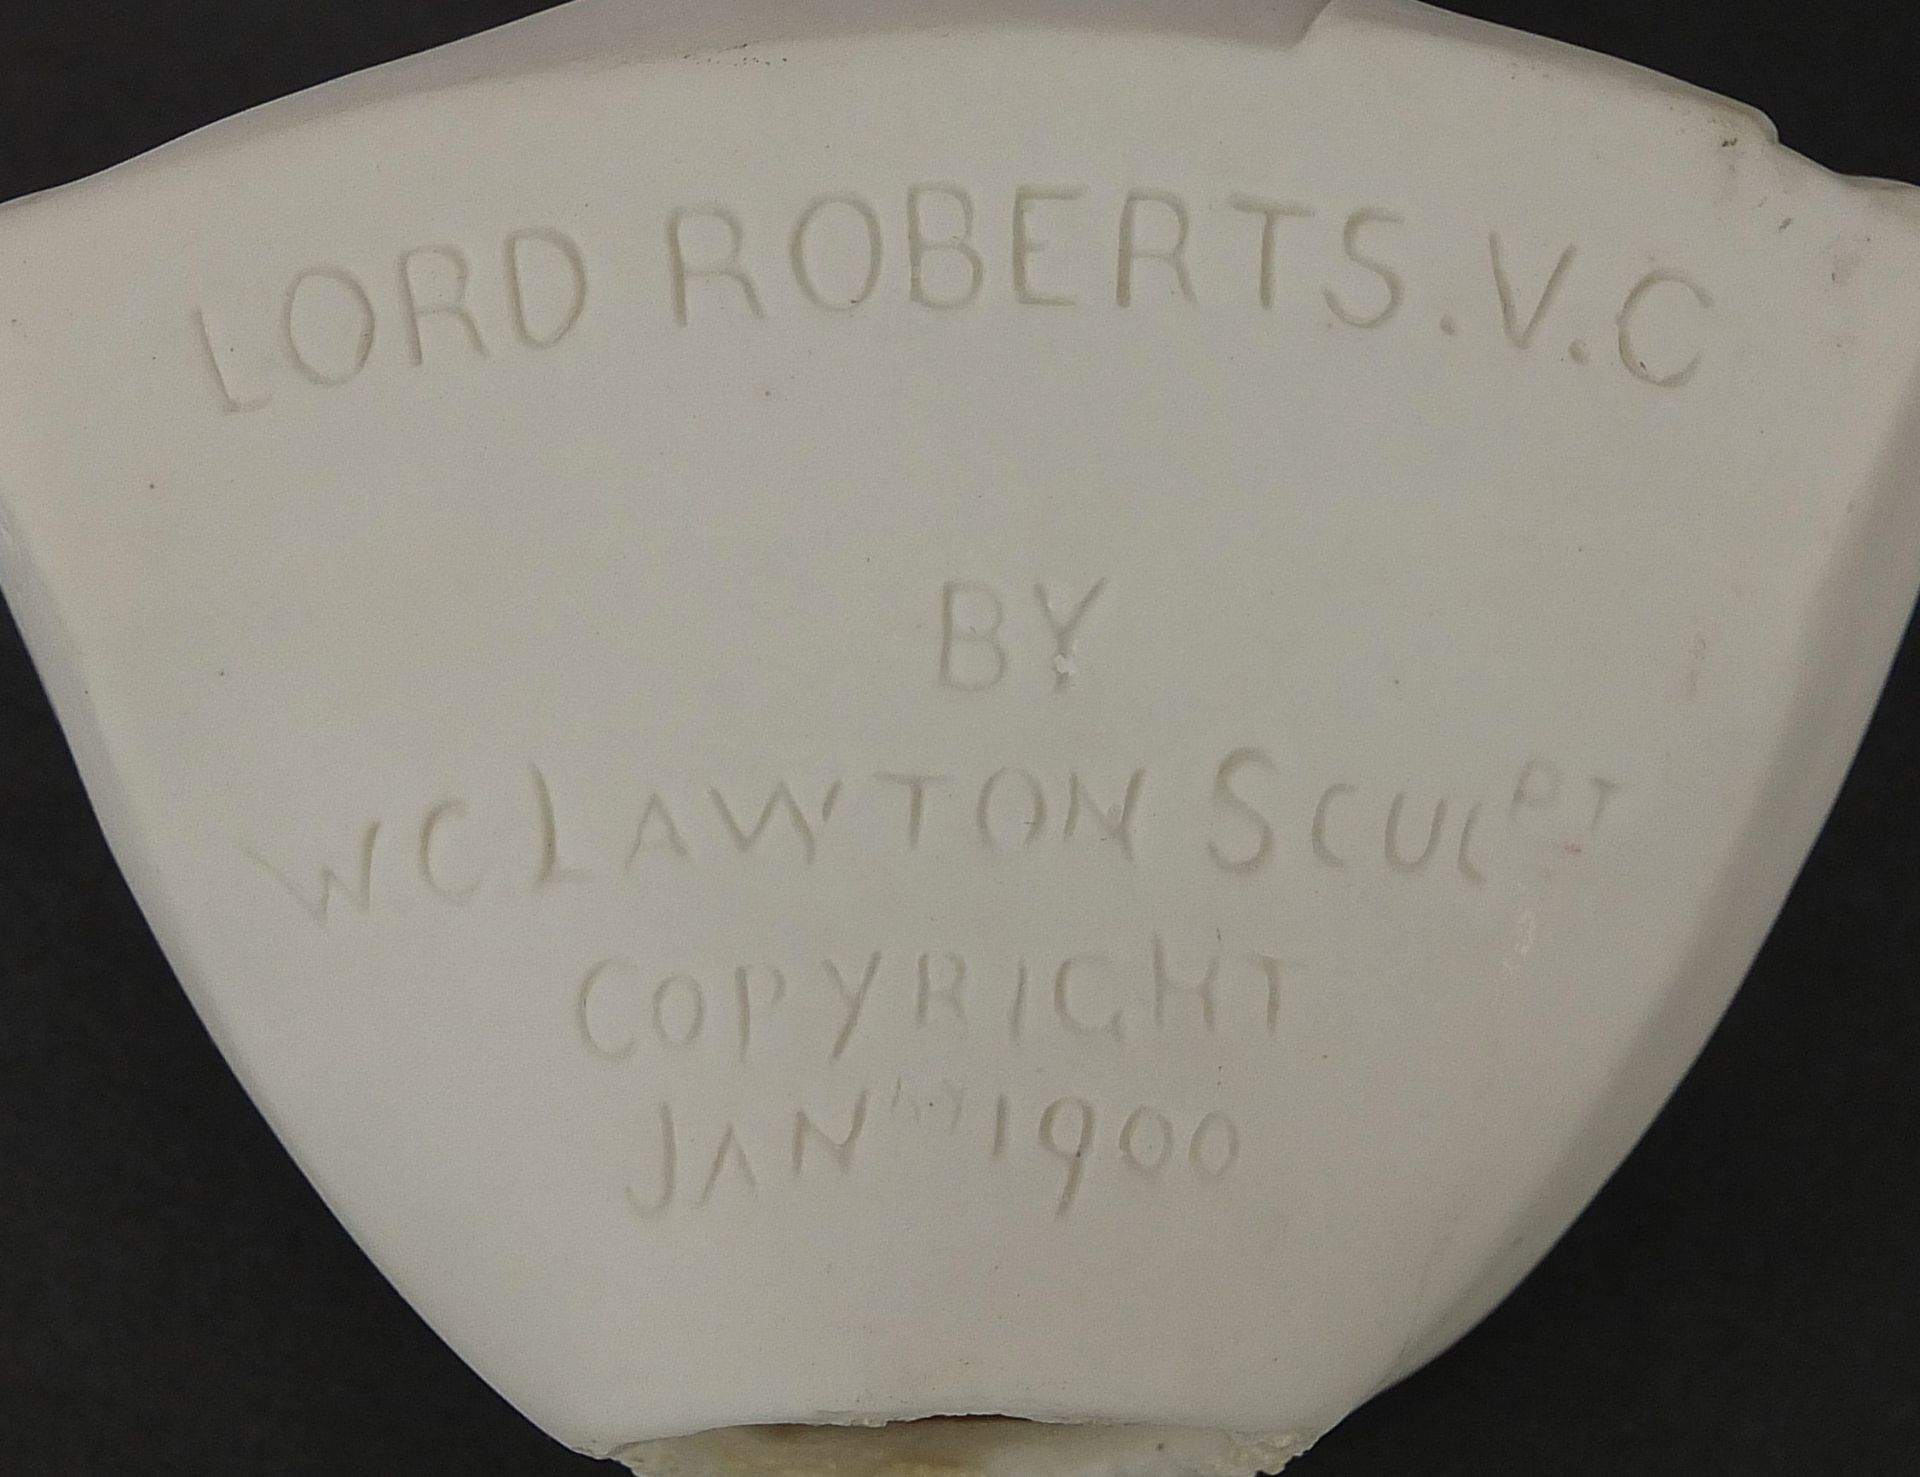 W C Lawton, Victorian parian ware bust of Lord Roberts VC dated January 1900, 26cm high - Image 5 of 5